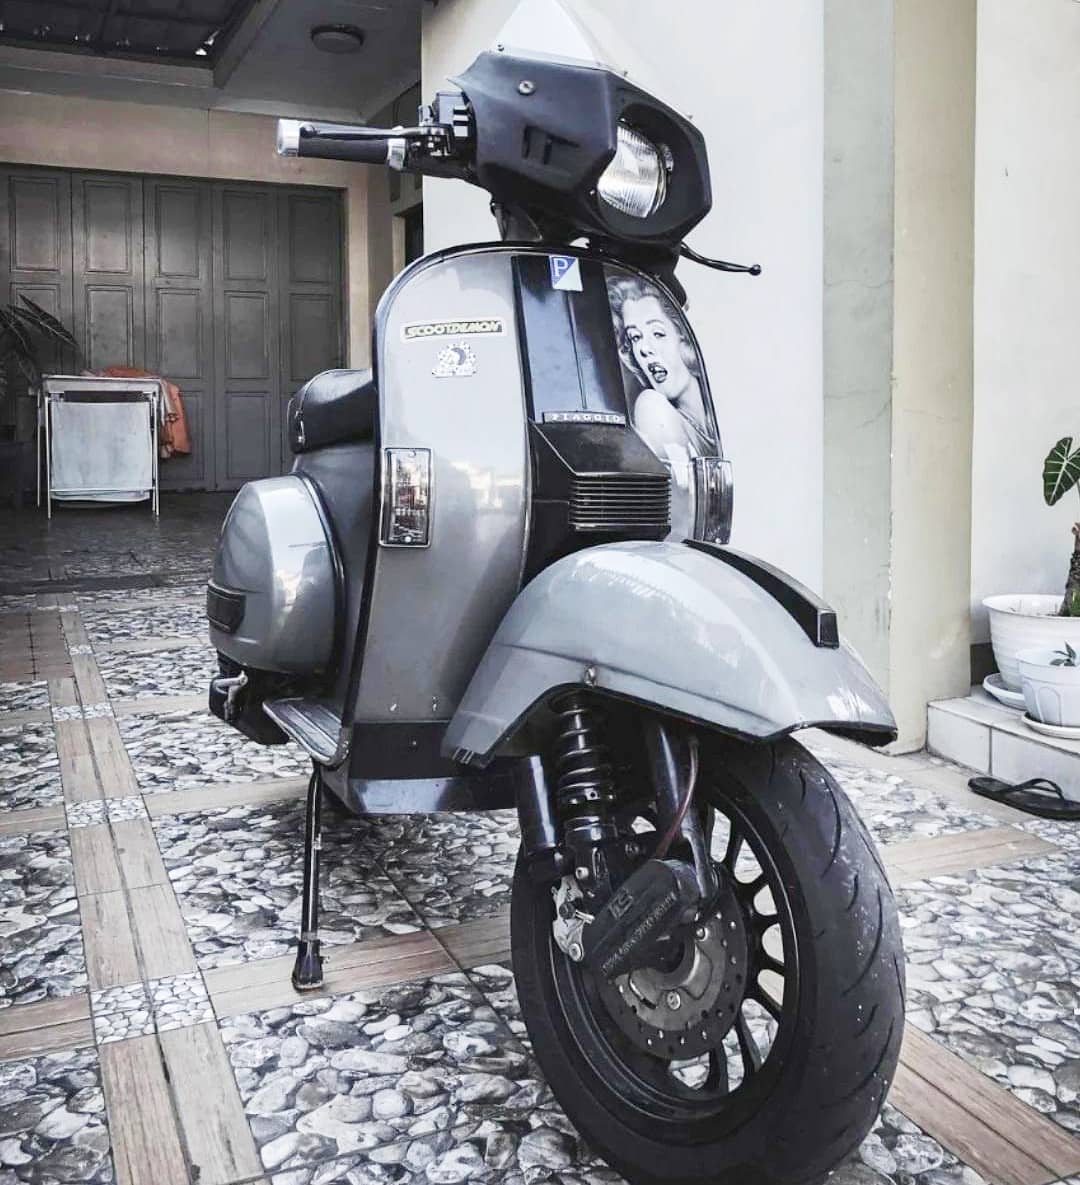 Grey Vespa Excel T5 custom modified with Vespa Sprint wheel 

Order Vespa genuine wheel from official dealer
Contact Wa 0819-04-595959
Cek photos in highlight @vesparkindo 
Atau shop online www.tokopedia.com/vesparkindo 

Hashtag and mention @vespapxnet for feature repost
Check website www.vespapx.net for more 

@saybekti